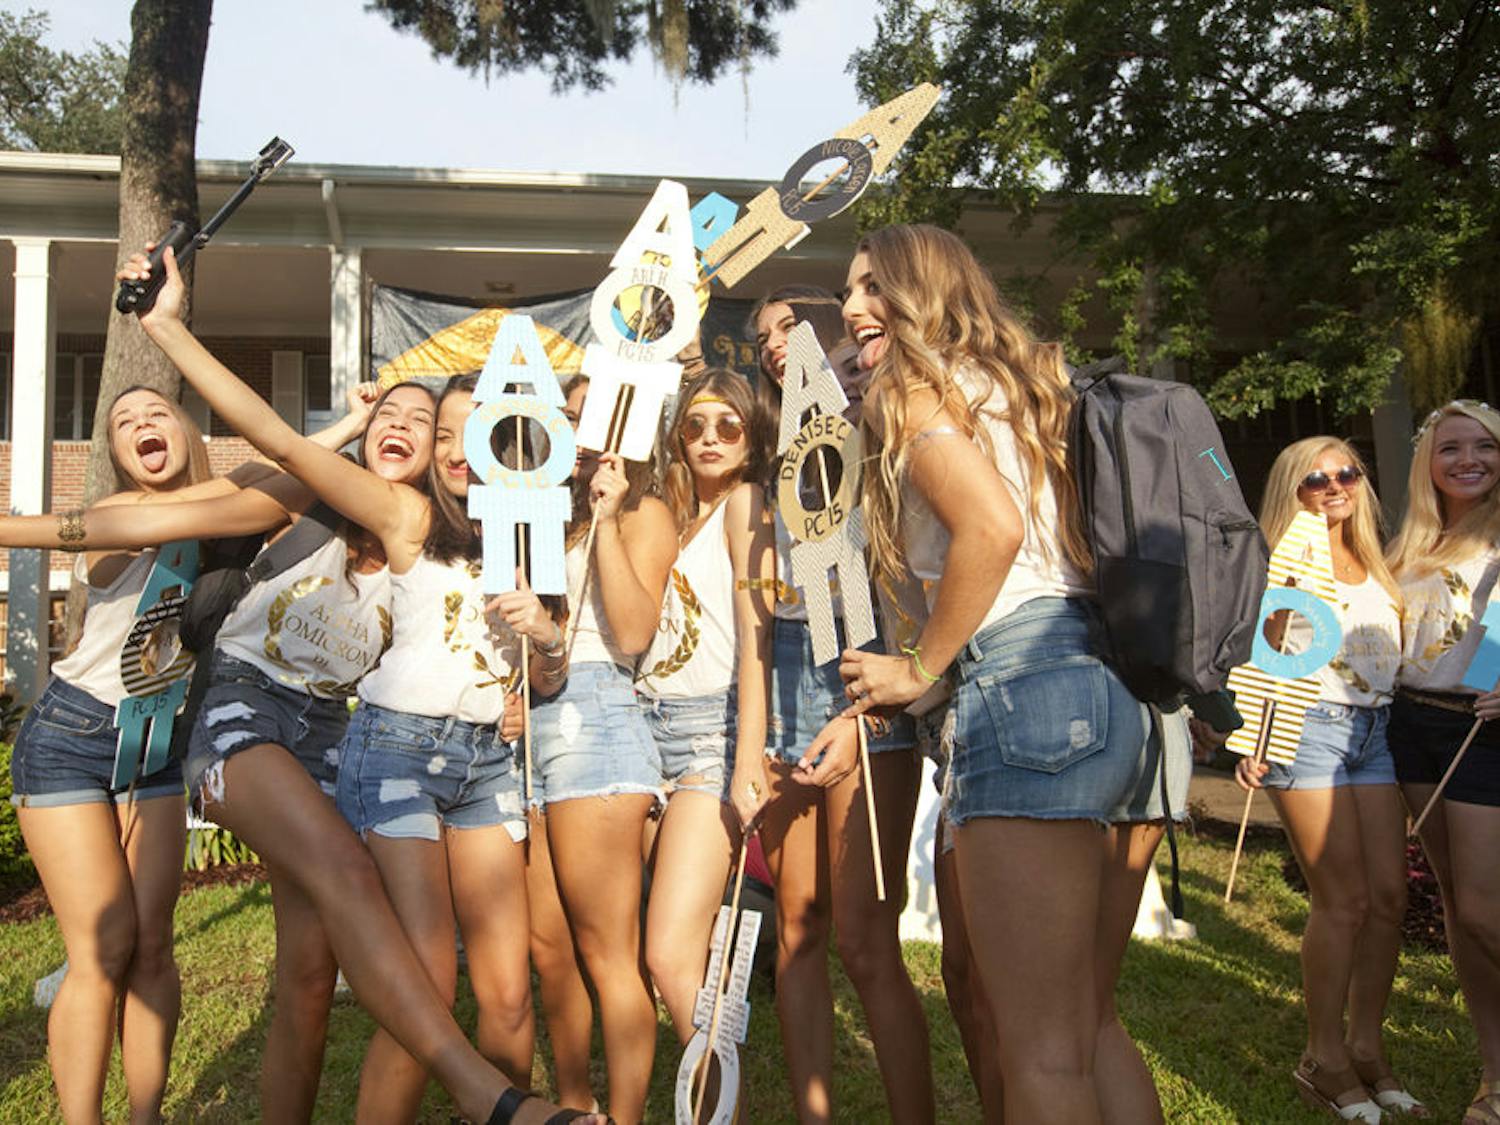 High heels clacked against wet sidewalks as smiling girls rushed to their new houses. The drizzling Florida rain stopped Wednesday evening, allowing the sun to spotlight the new recruits on sorority row during Bid Day. These new members have been rushing since last Wednesday. After three rounds of recruitment and a preferential round, sororities finally revealed which girls were given "bids." During this process, more than 1,700 girls visited each sorority house in hopes of finding their perfect match, feeling out which group of girls they could potentially call sisters.